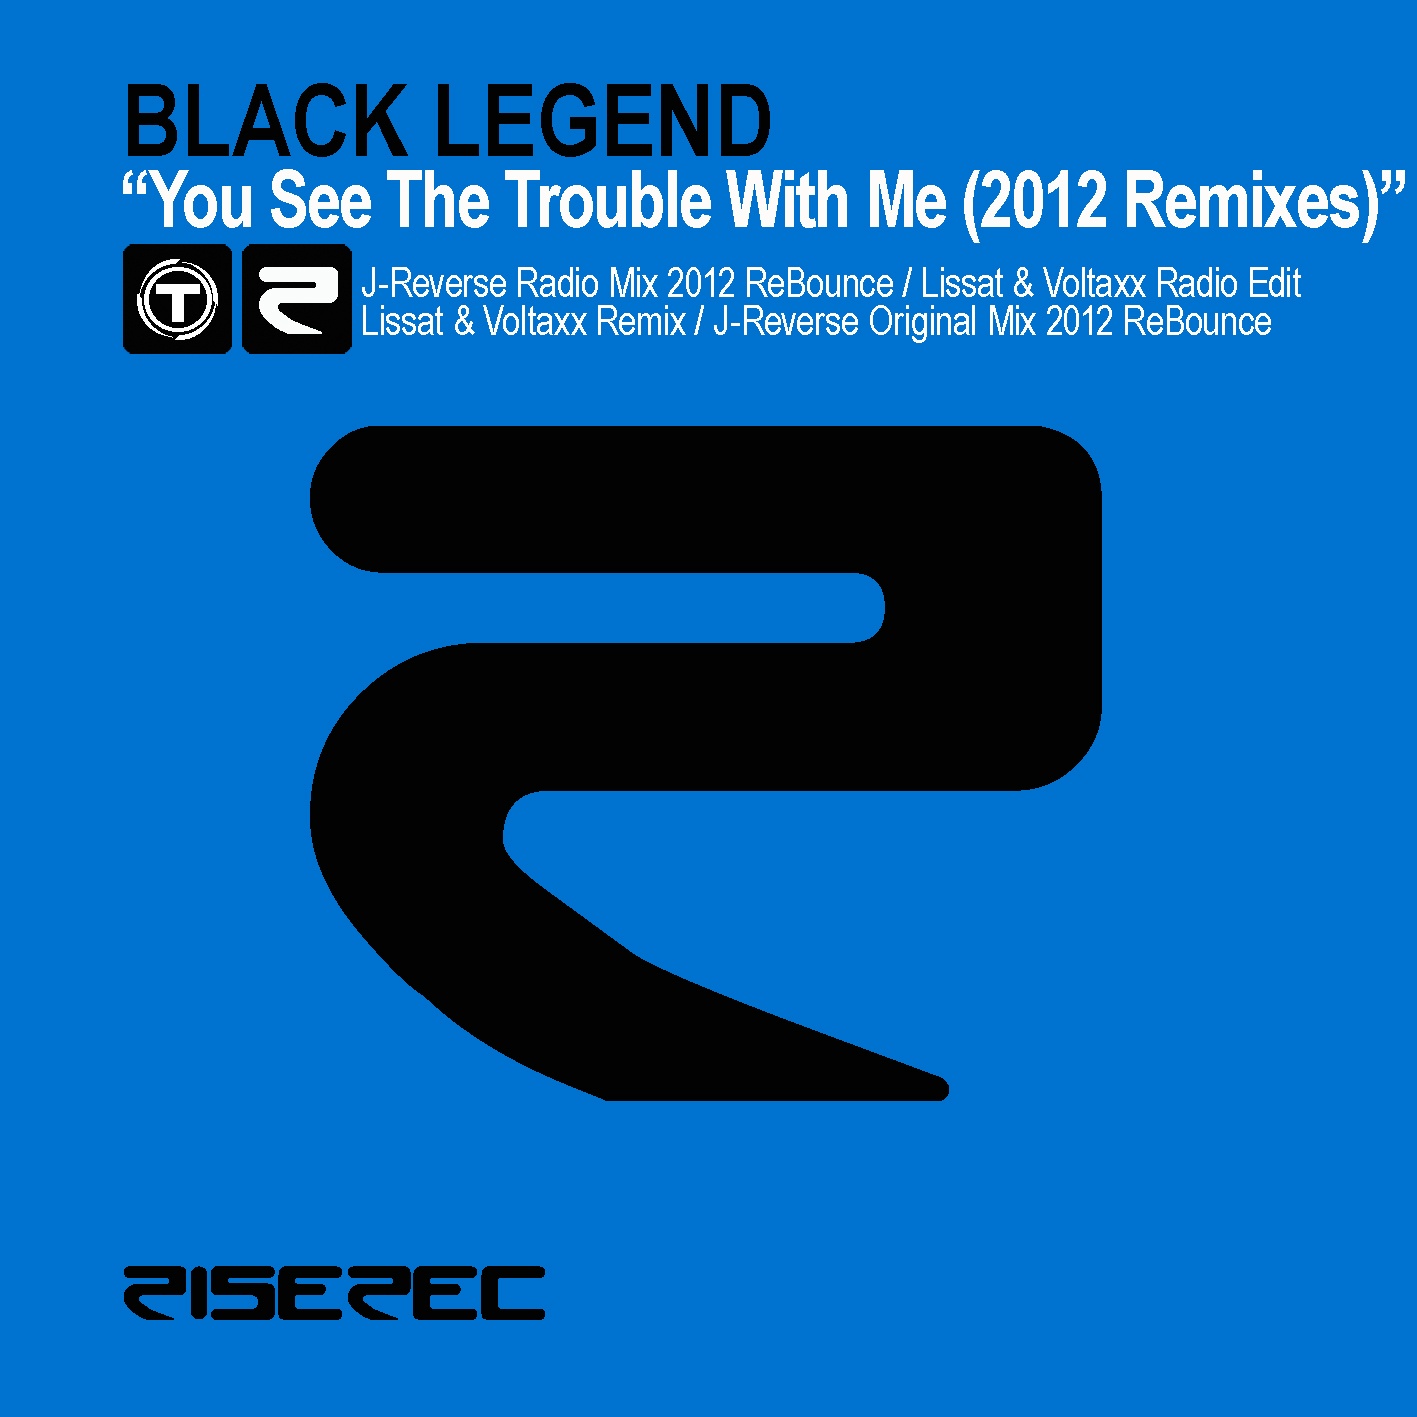 You See The Trouble With Me (J-Reverse Radio Mix 2012 ReBounce)